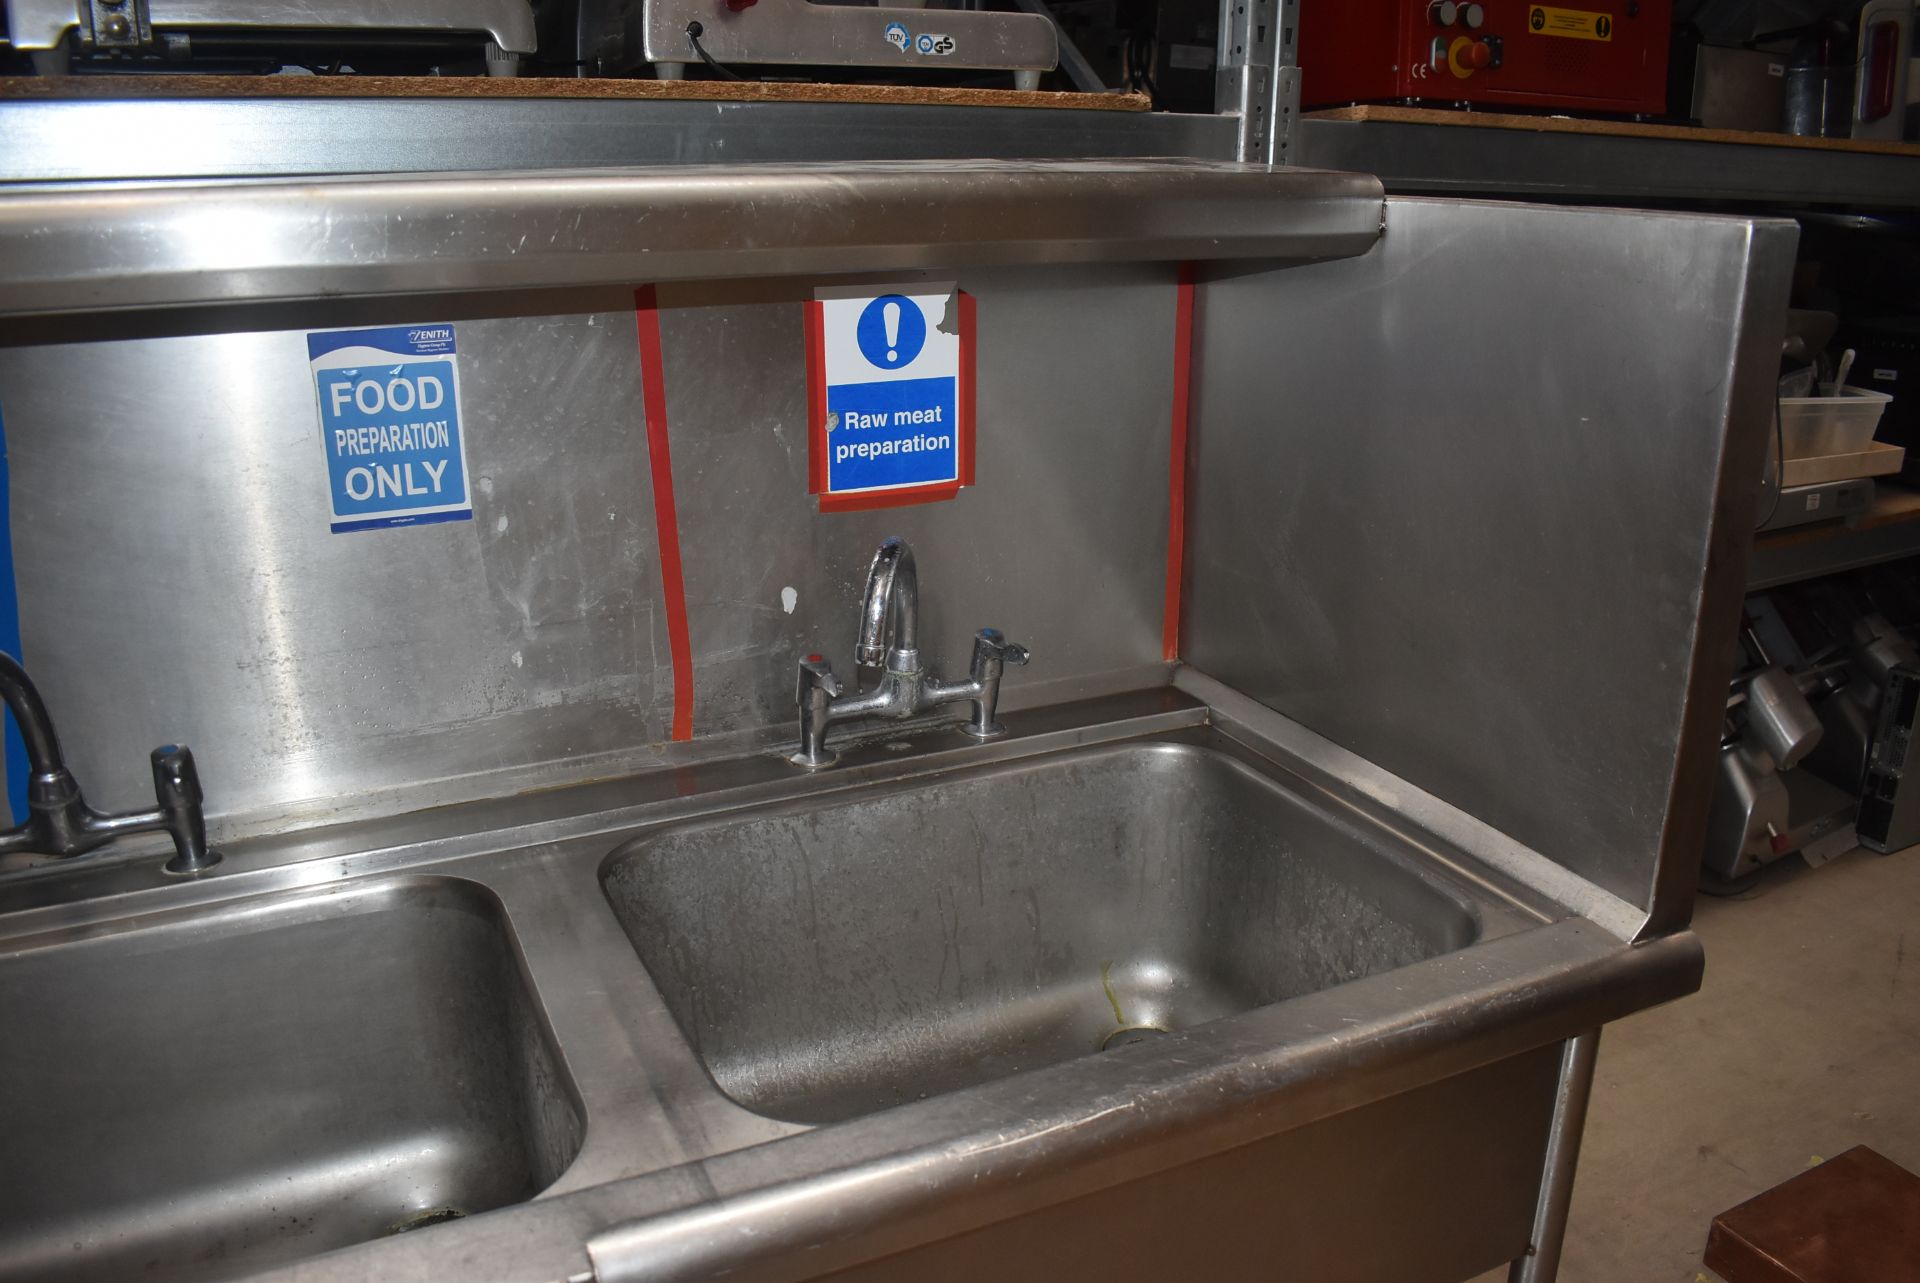 1 x Stainless Steel Twin Sink Wash Unit With Mixer Taps and Splash Back Surround - Width: 125 cms - Image 6 of 11